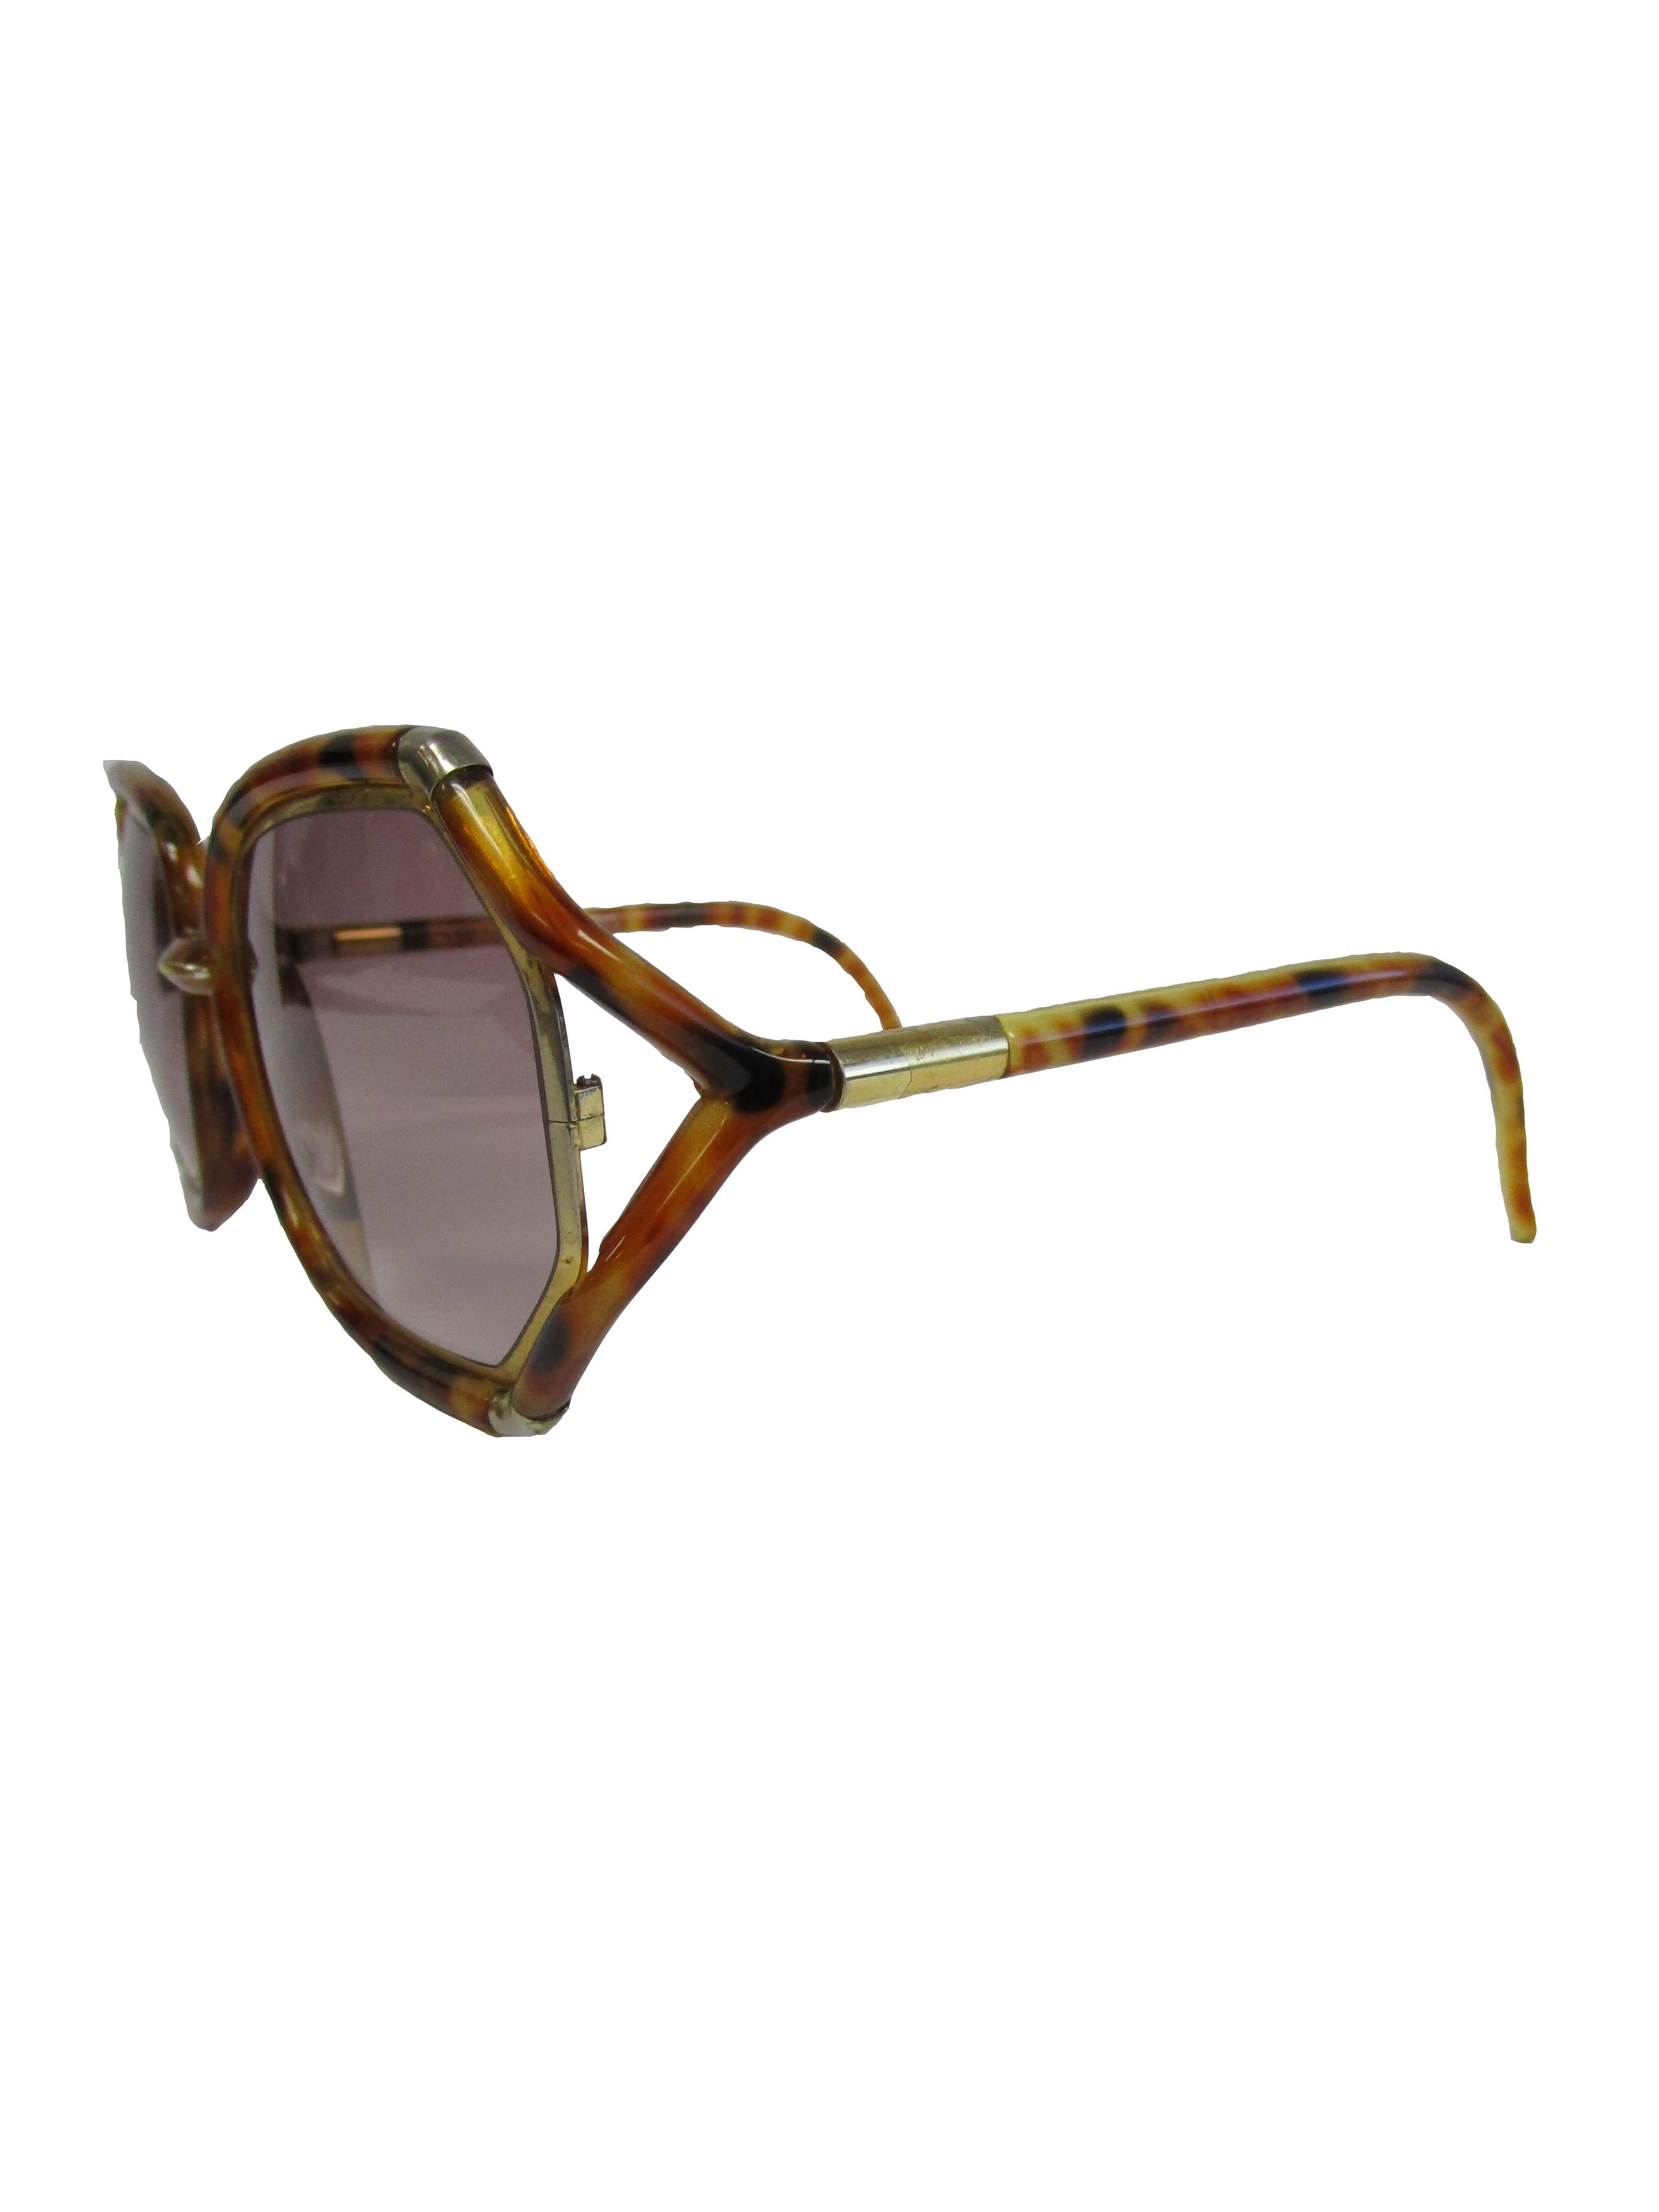 
Classic 1980's  Ted Lapidus sunglasses. These iconic shades feature an over-sized frame that connect to an interesting y-shaped arm, the lenses are a dusky tint and complement the sunglasses's earthy color! 
You can catch  stars such as Jennifer